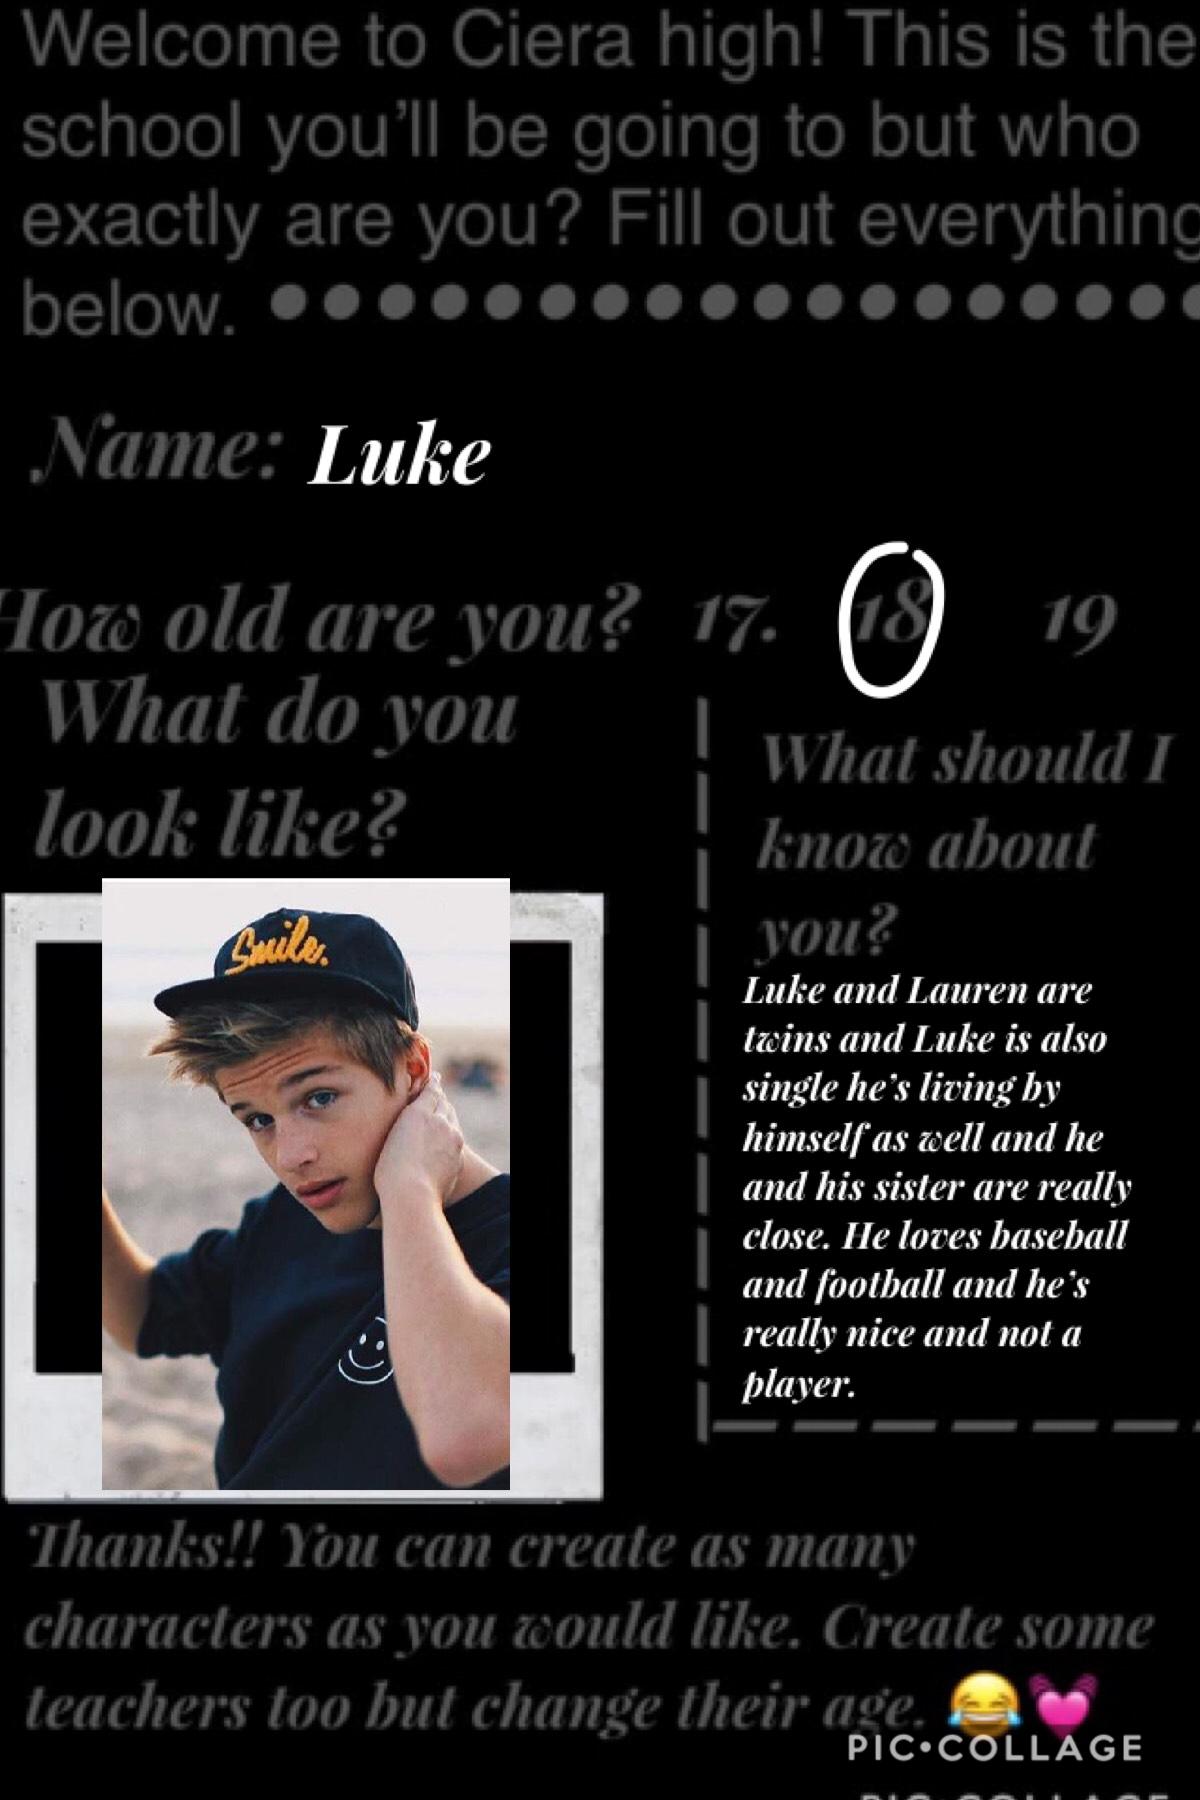 This is Luke he’s another one of my characters.